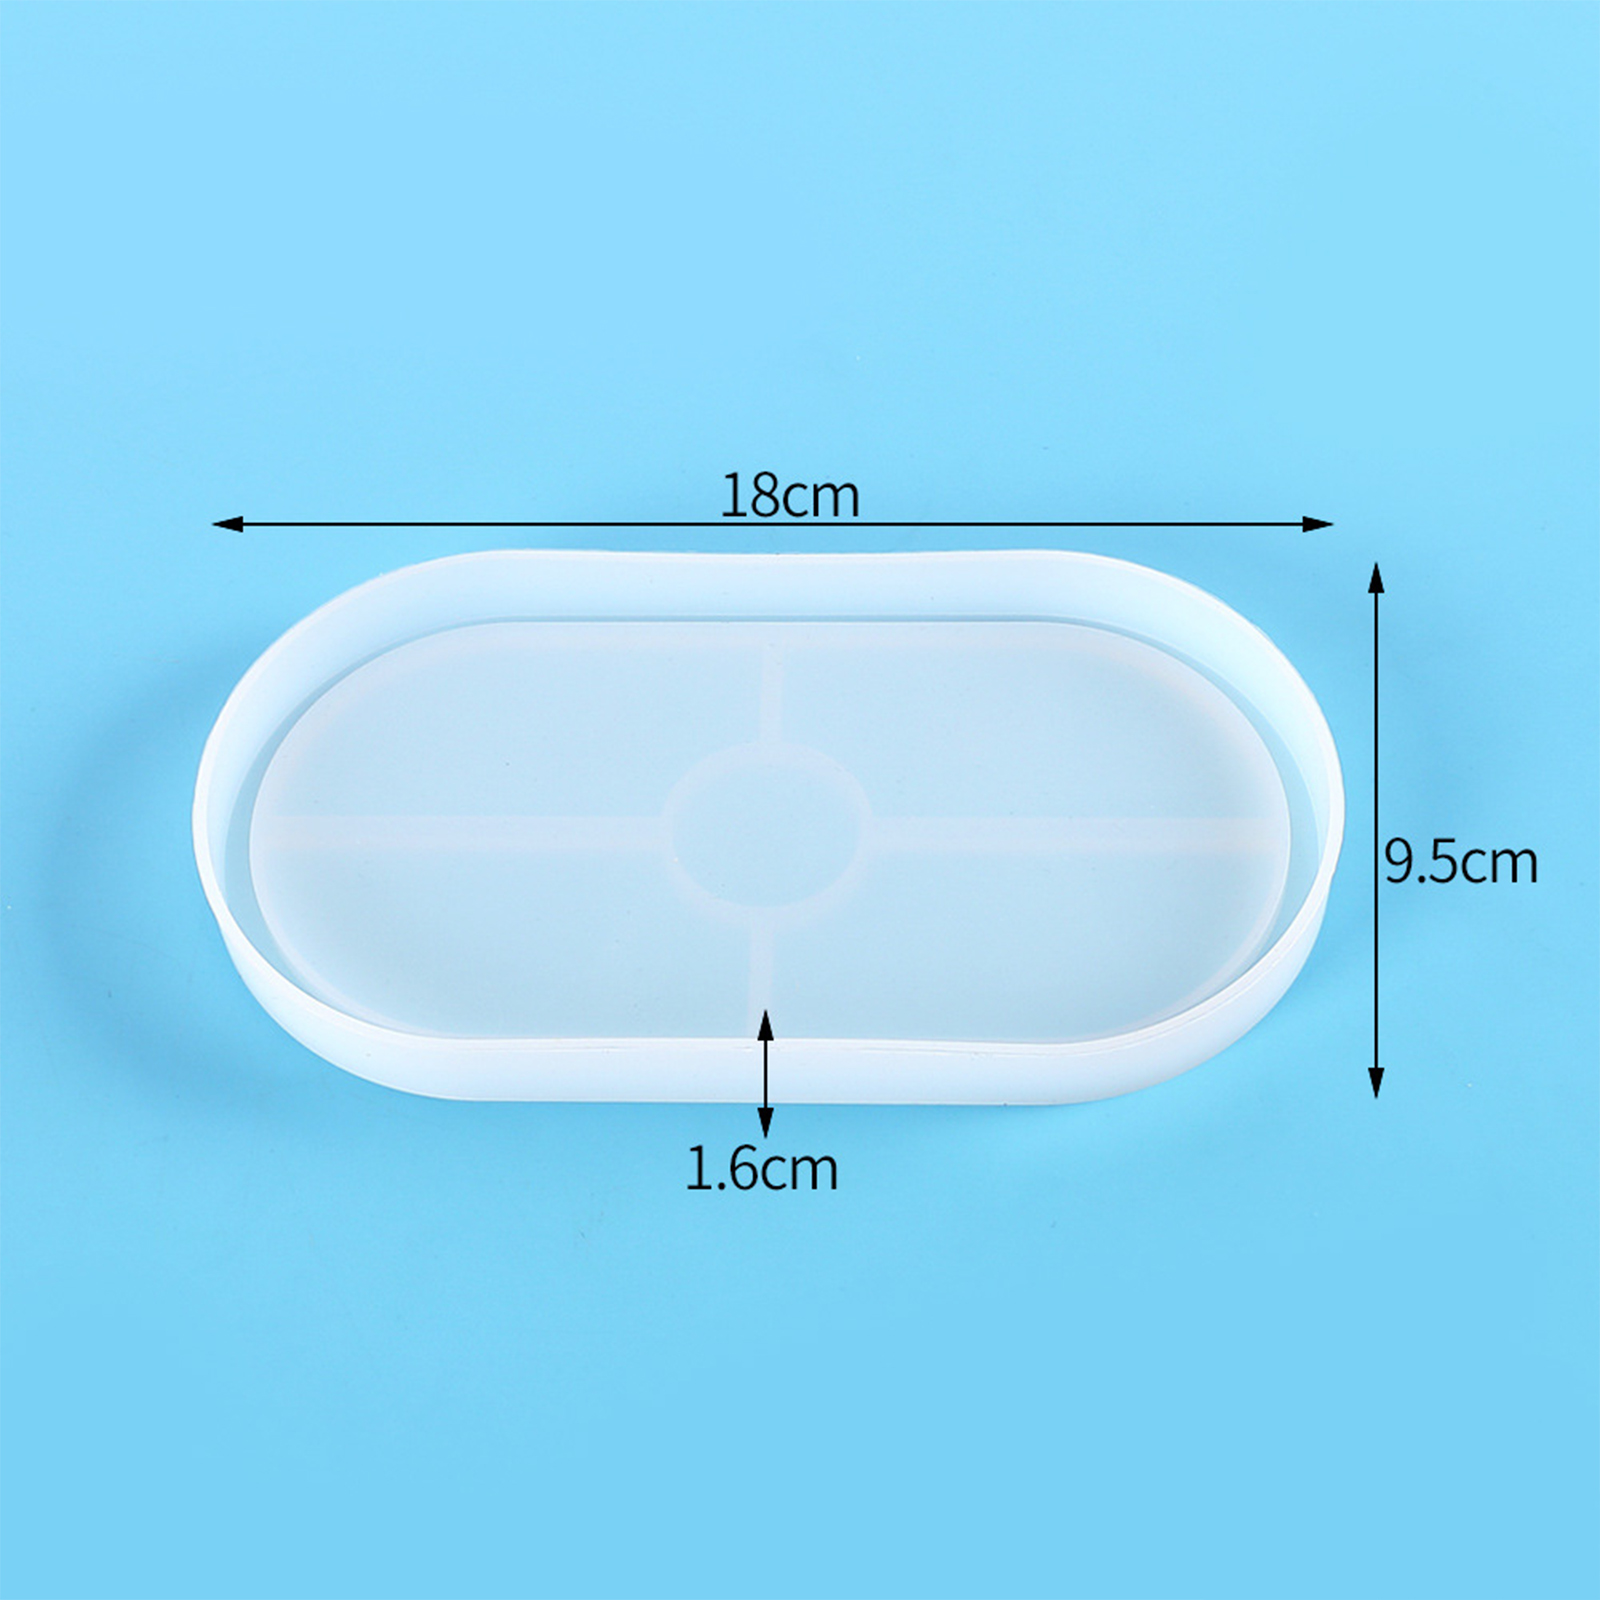 Picture of Silicone Resin Mold For Jewelry Making Coaster Oval White 18cm x 9.5cm, 1 Piece